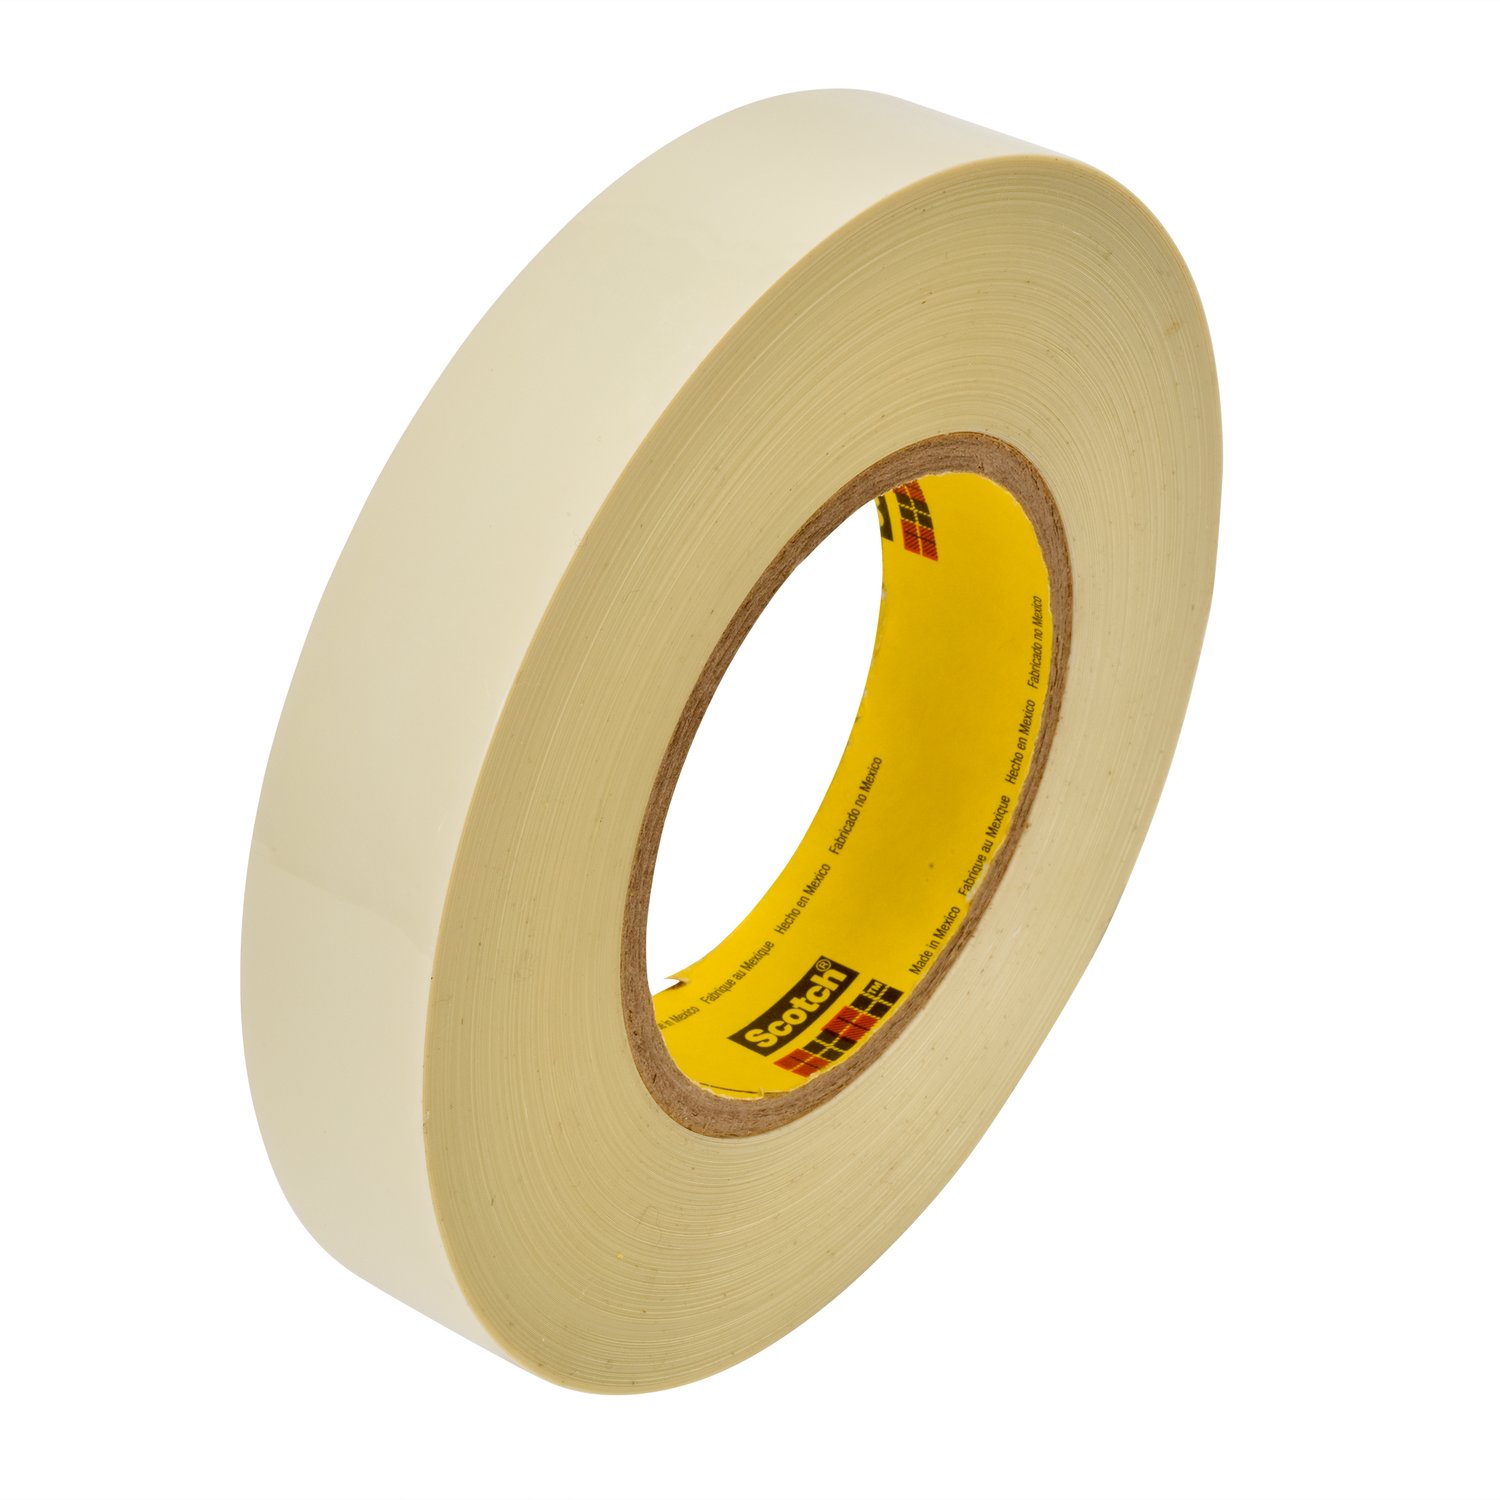 High Temperature Masking Tape: 2-1/2 Wide, 60 yd Long, 6.5 mil Thick, Tan